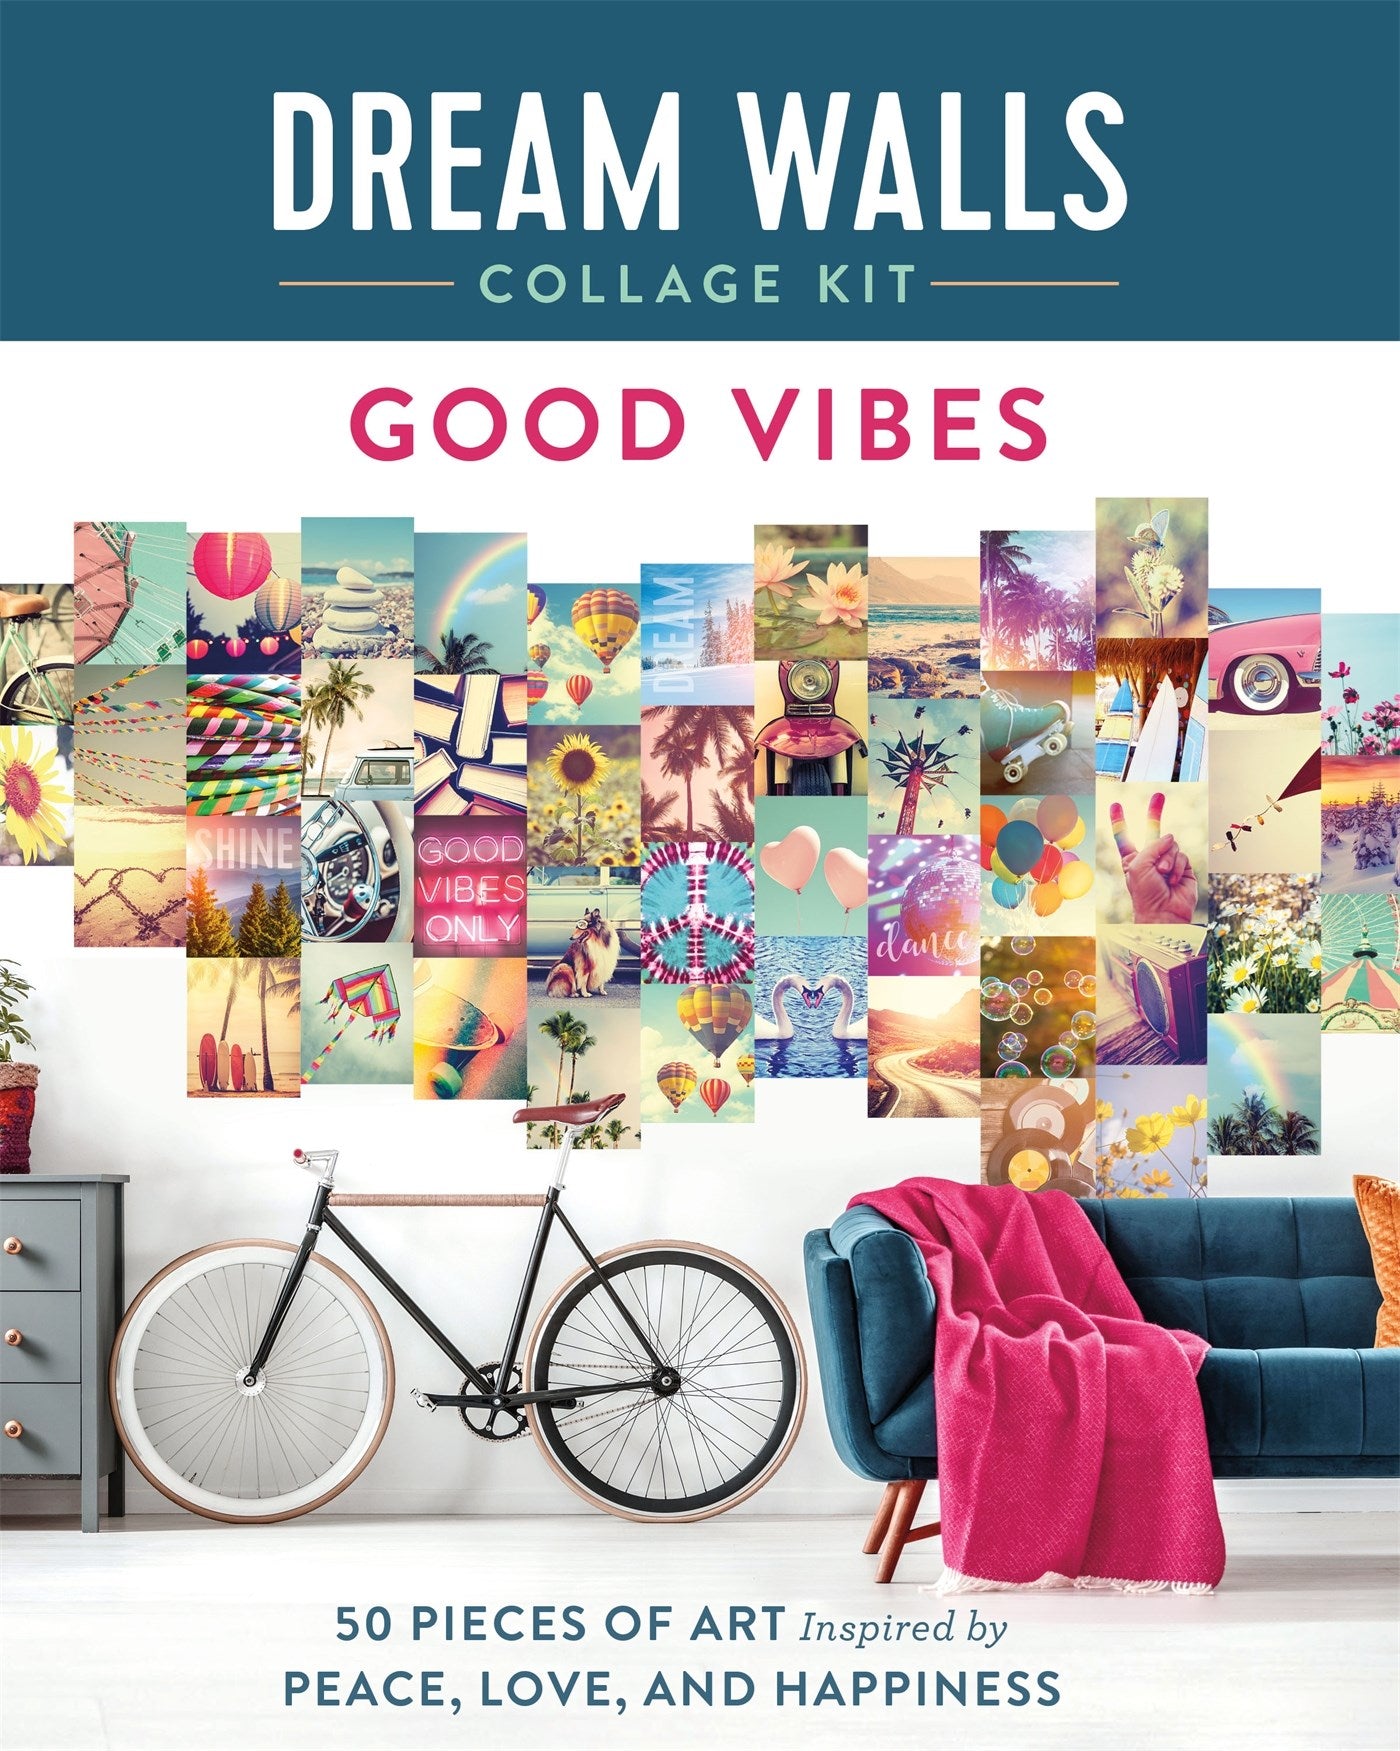 Dream Walls Collage Kit: Good Vibes : 50 Pieces of Art Inspired by Peace, Love, and Happiness